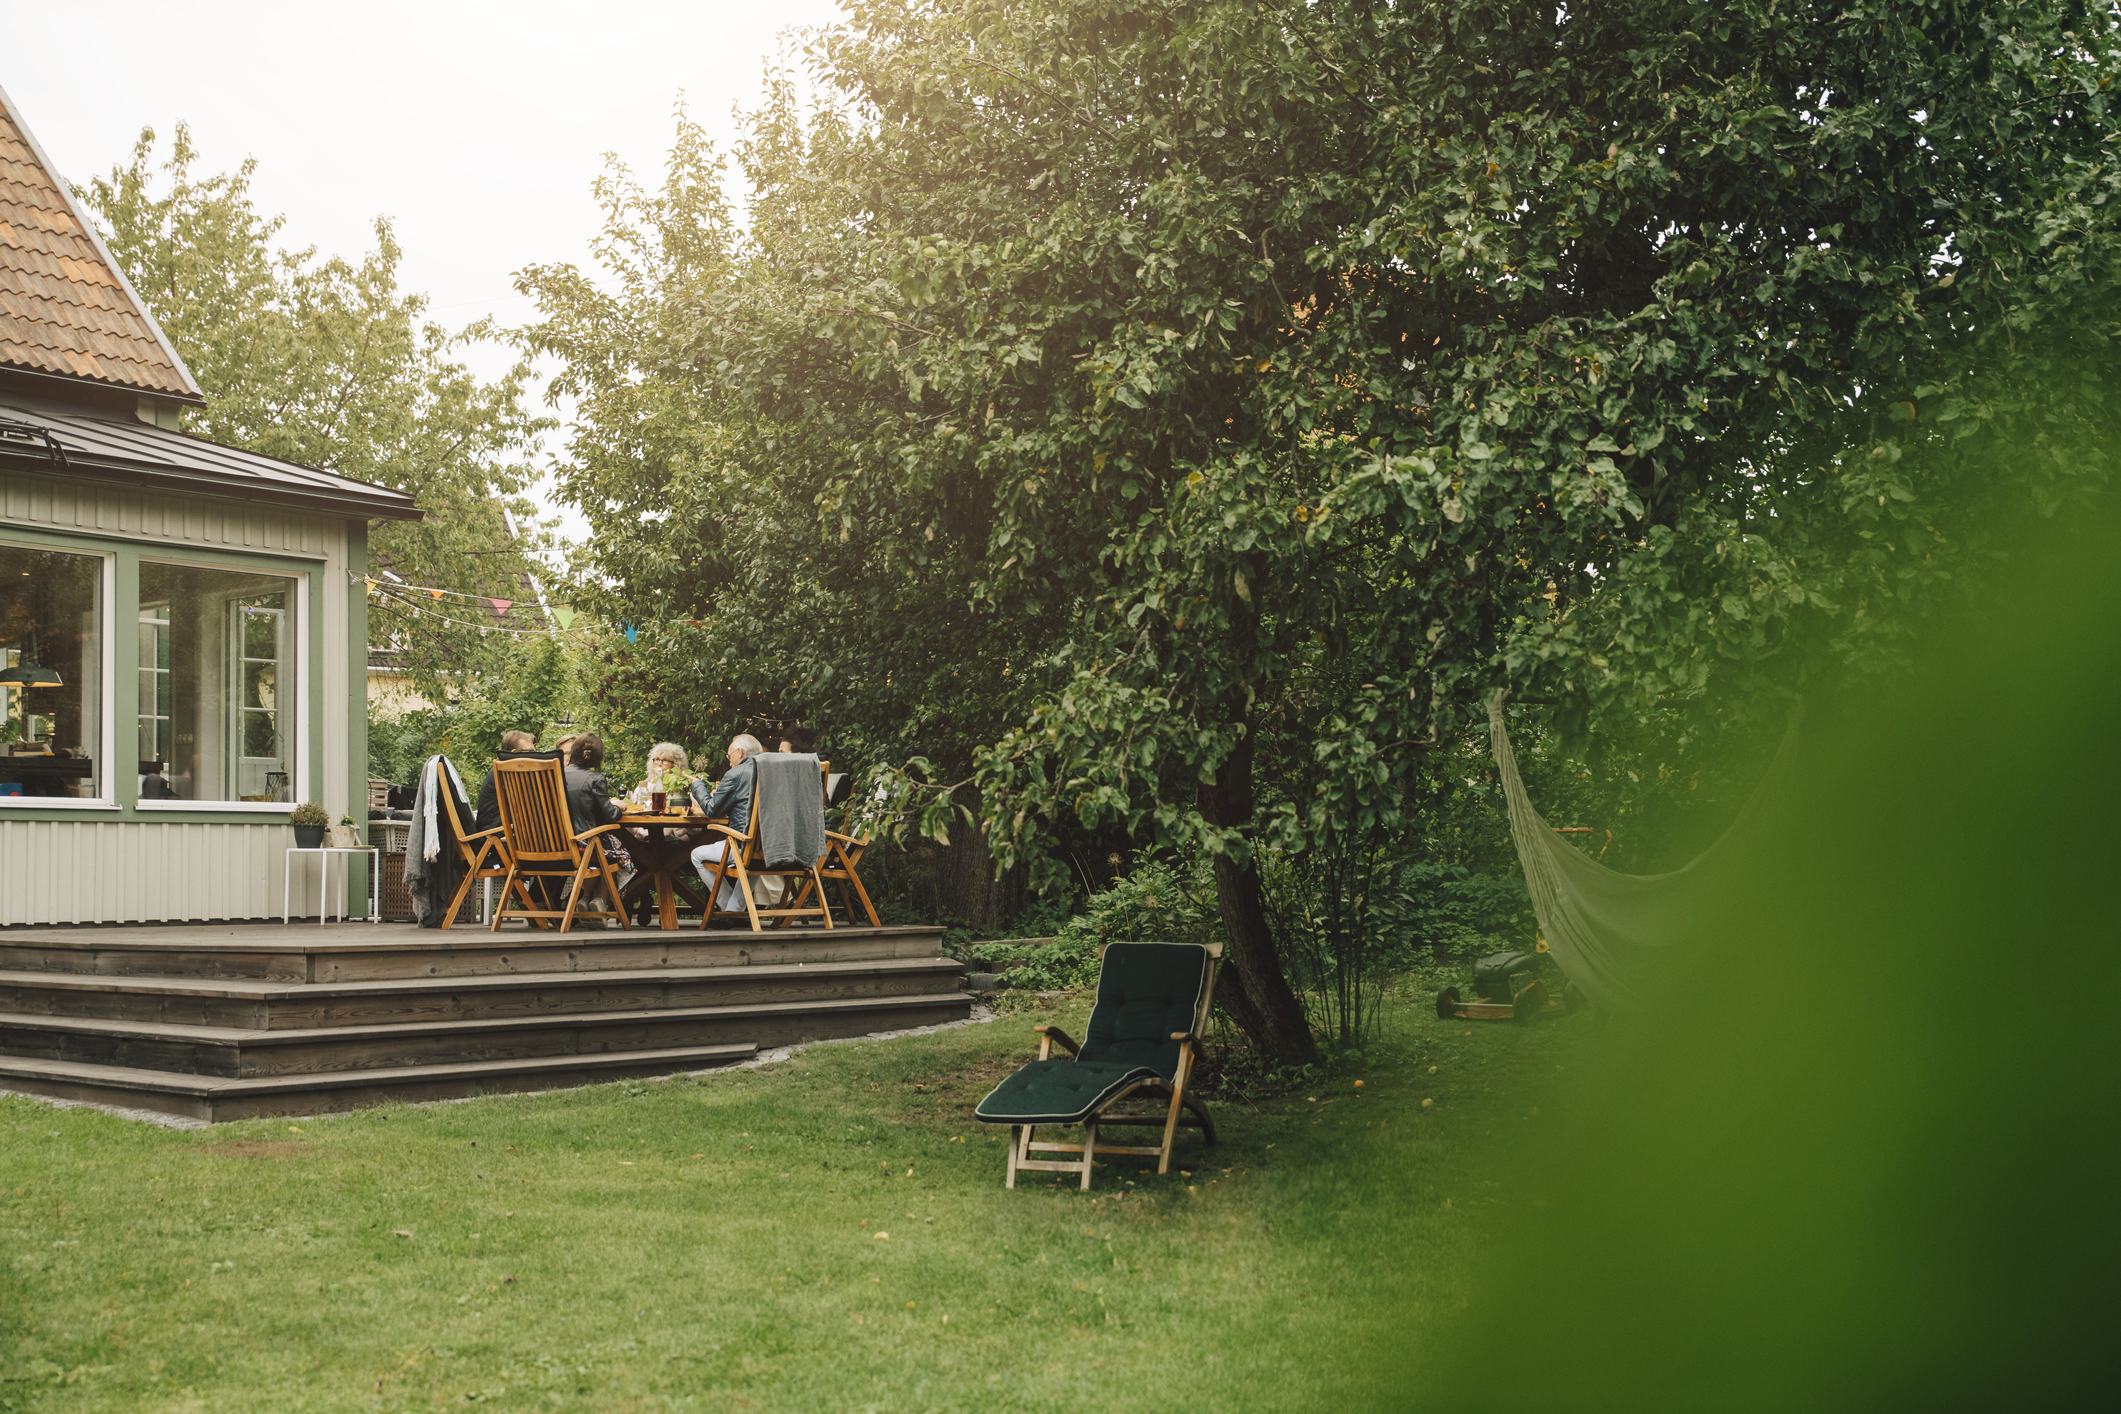 People are seated at a wooden table on a backyard deck next to a house, surrounded by trees and greenery